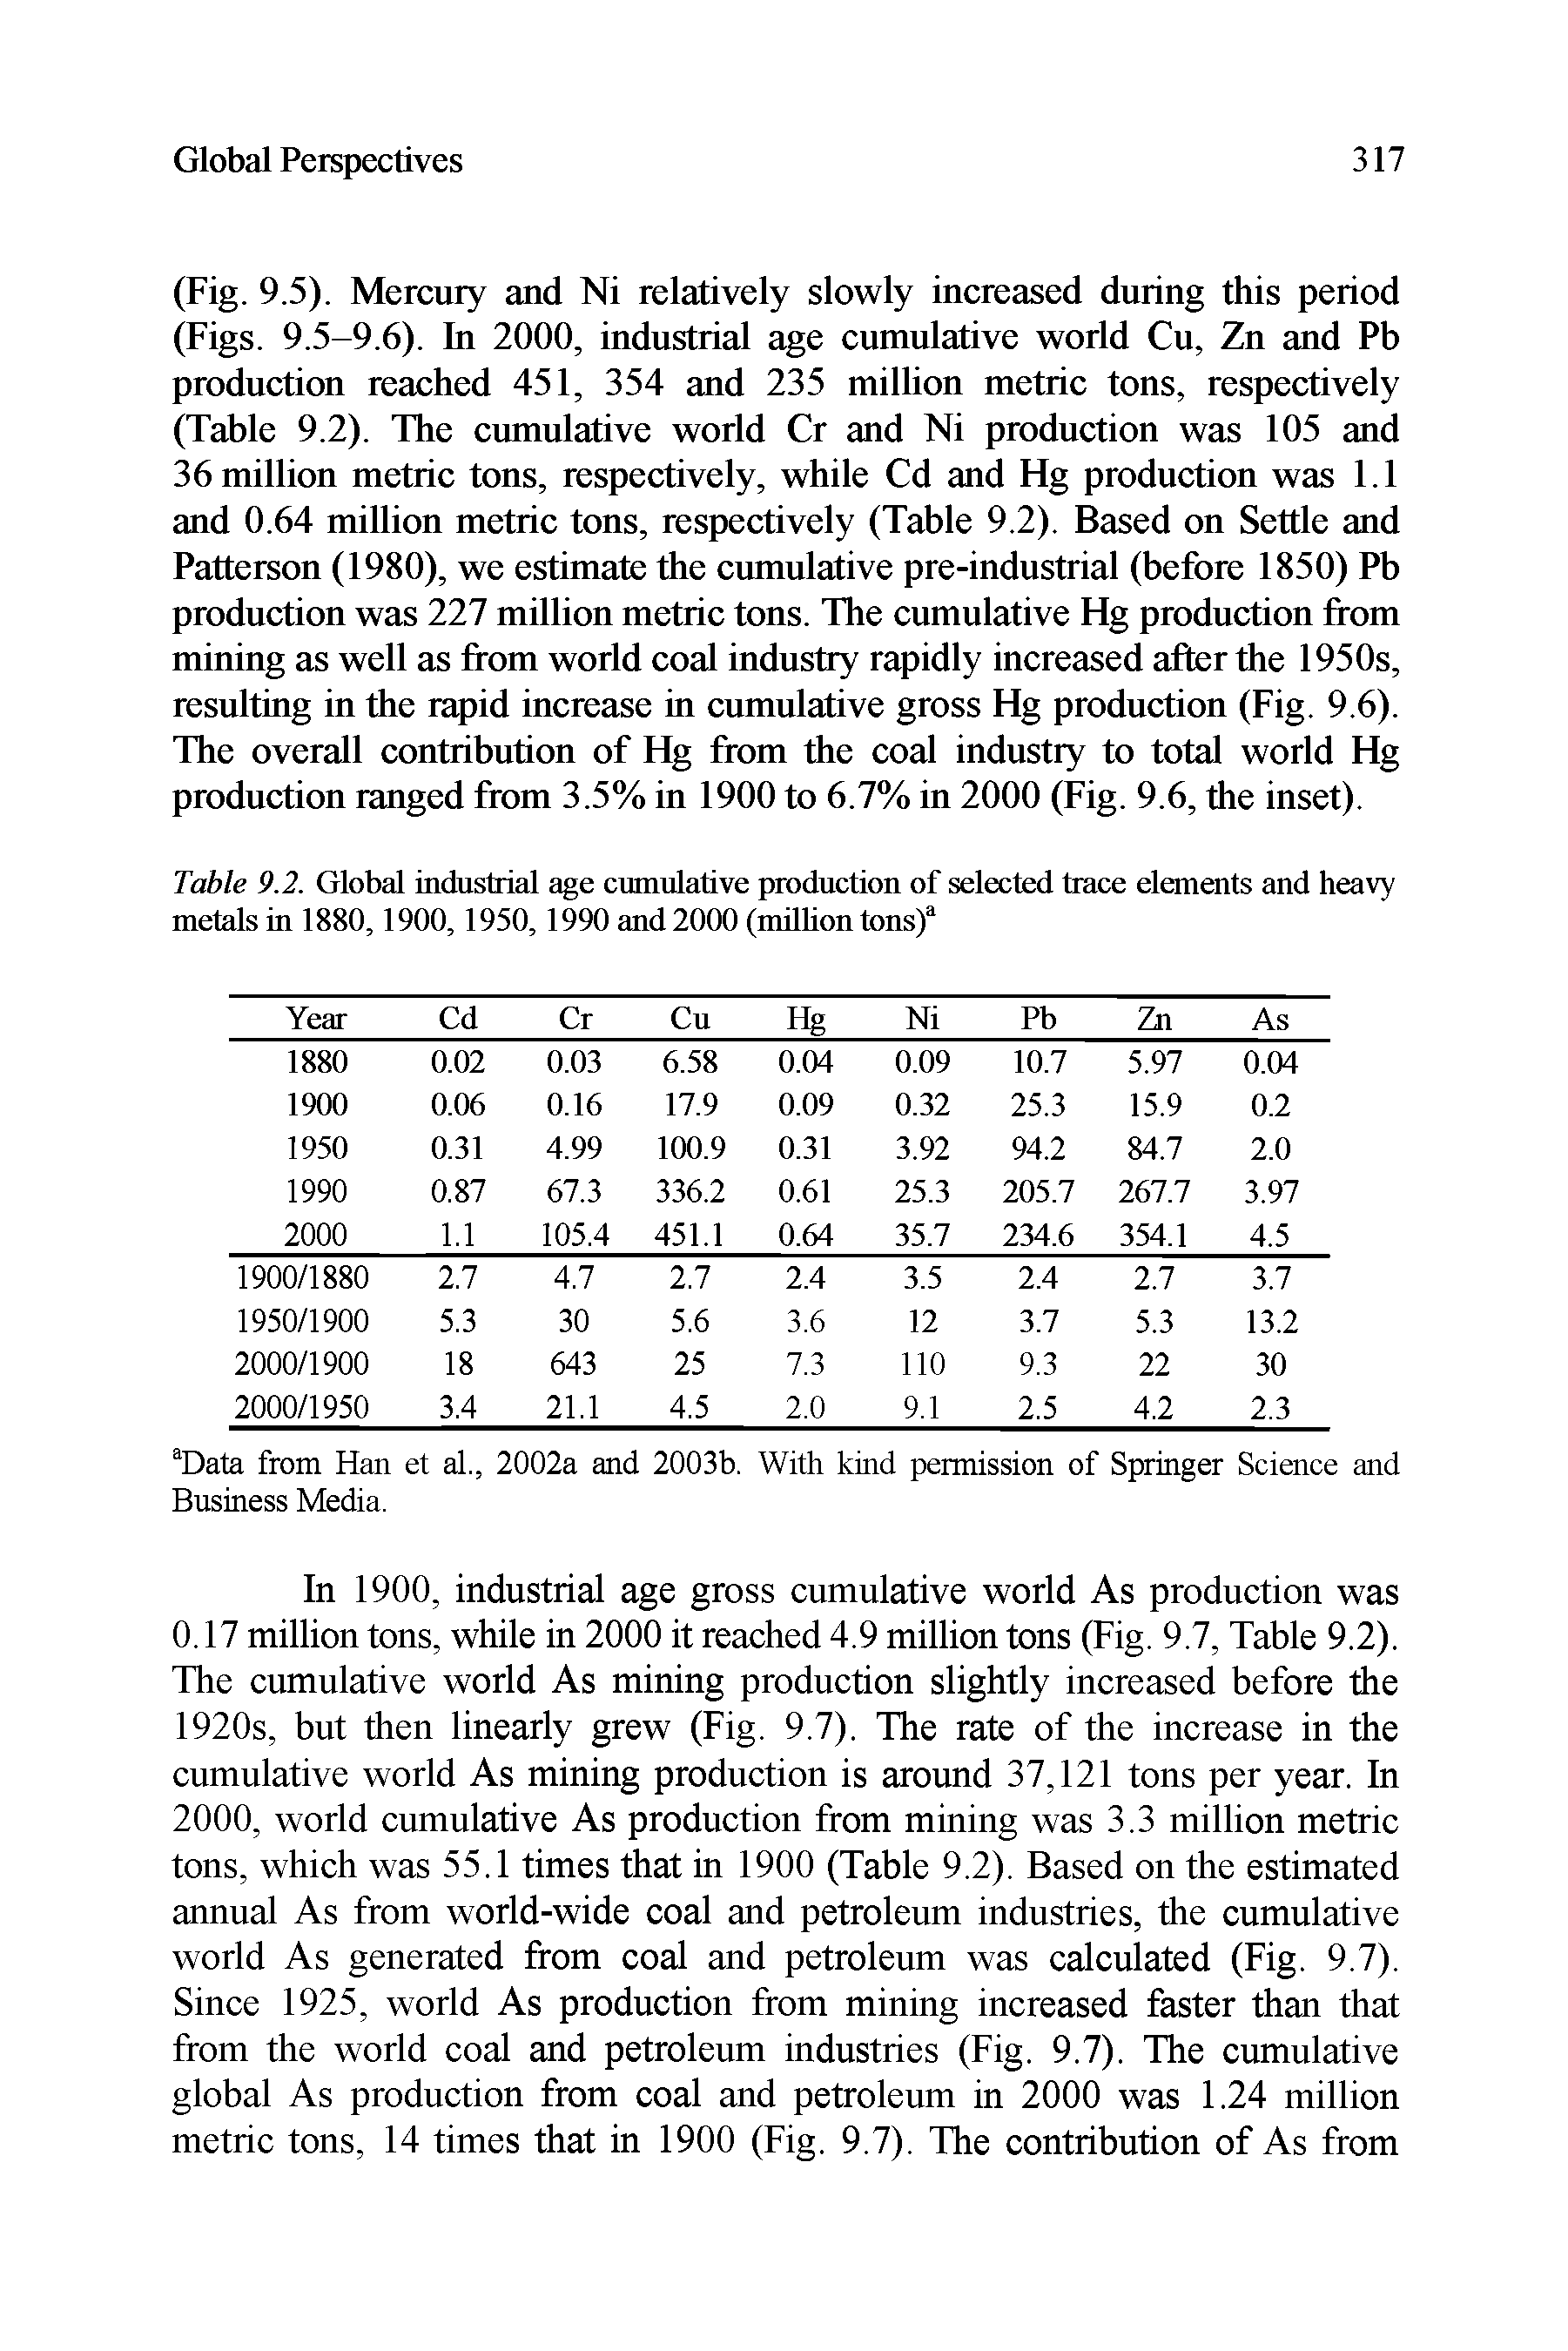 Table 9.2. Global industrial age cumulative production of selected trace elements and heavy metals in 1880,1900,1950,1990 and 2000 (million tons)a...